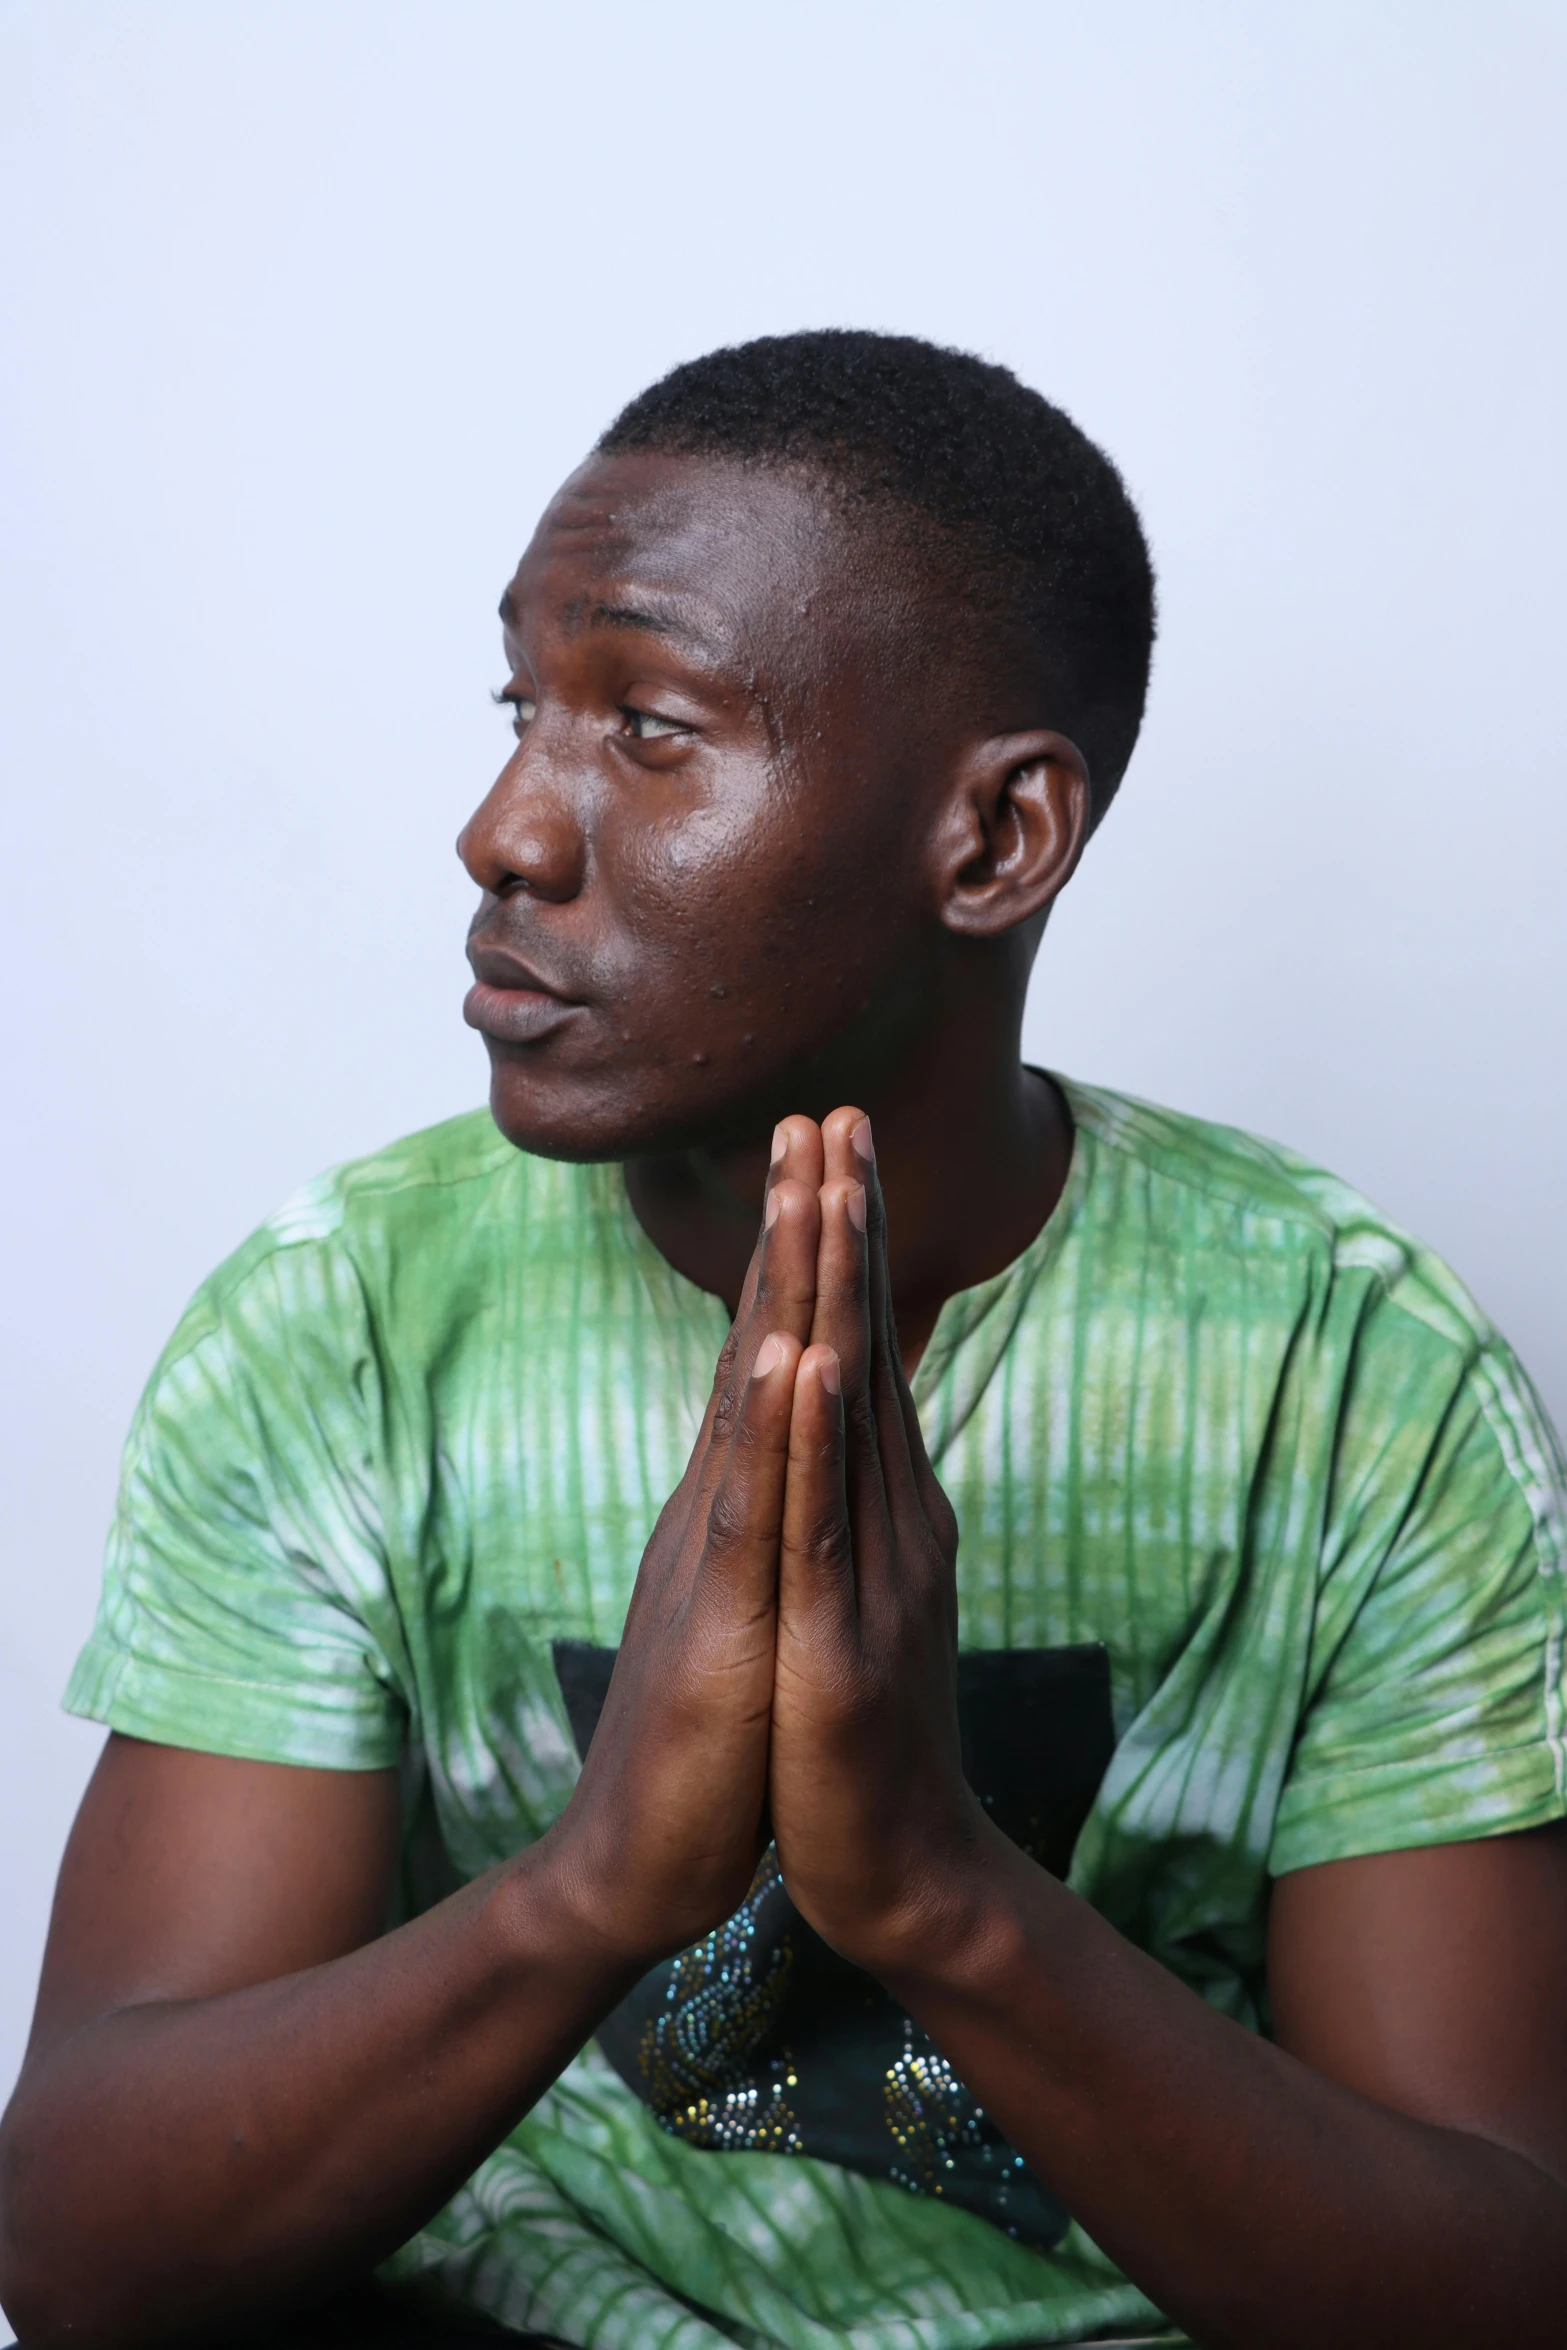 a young man wearing a green shirt doing some kind of praying